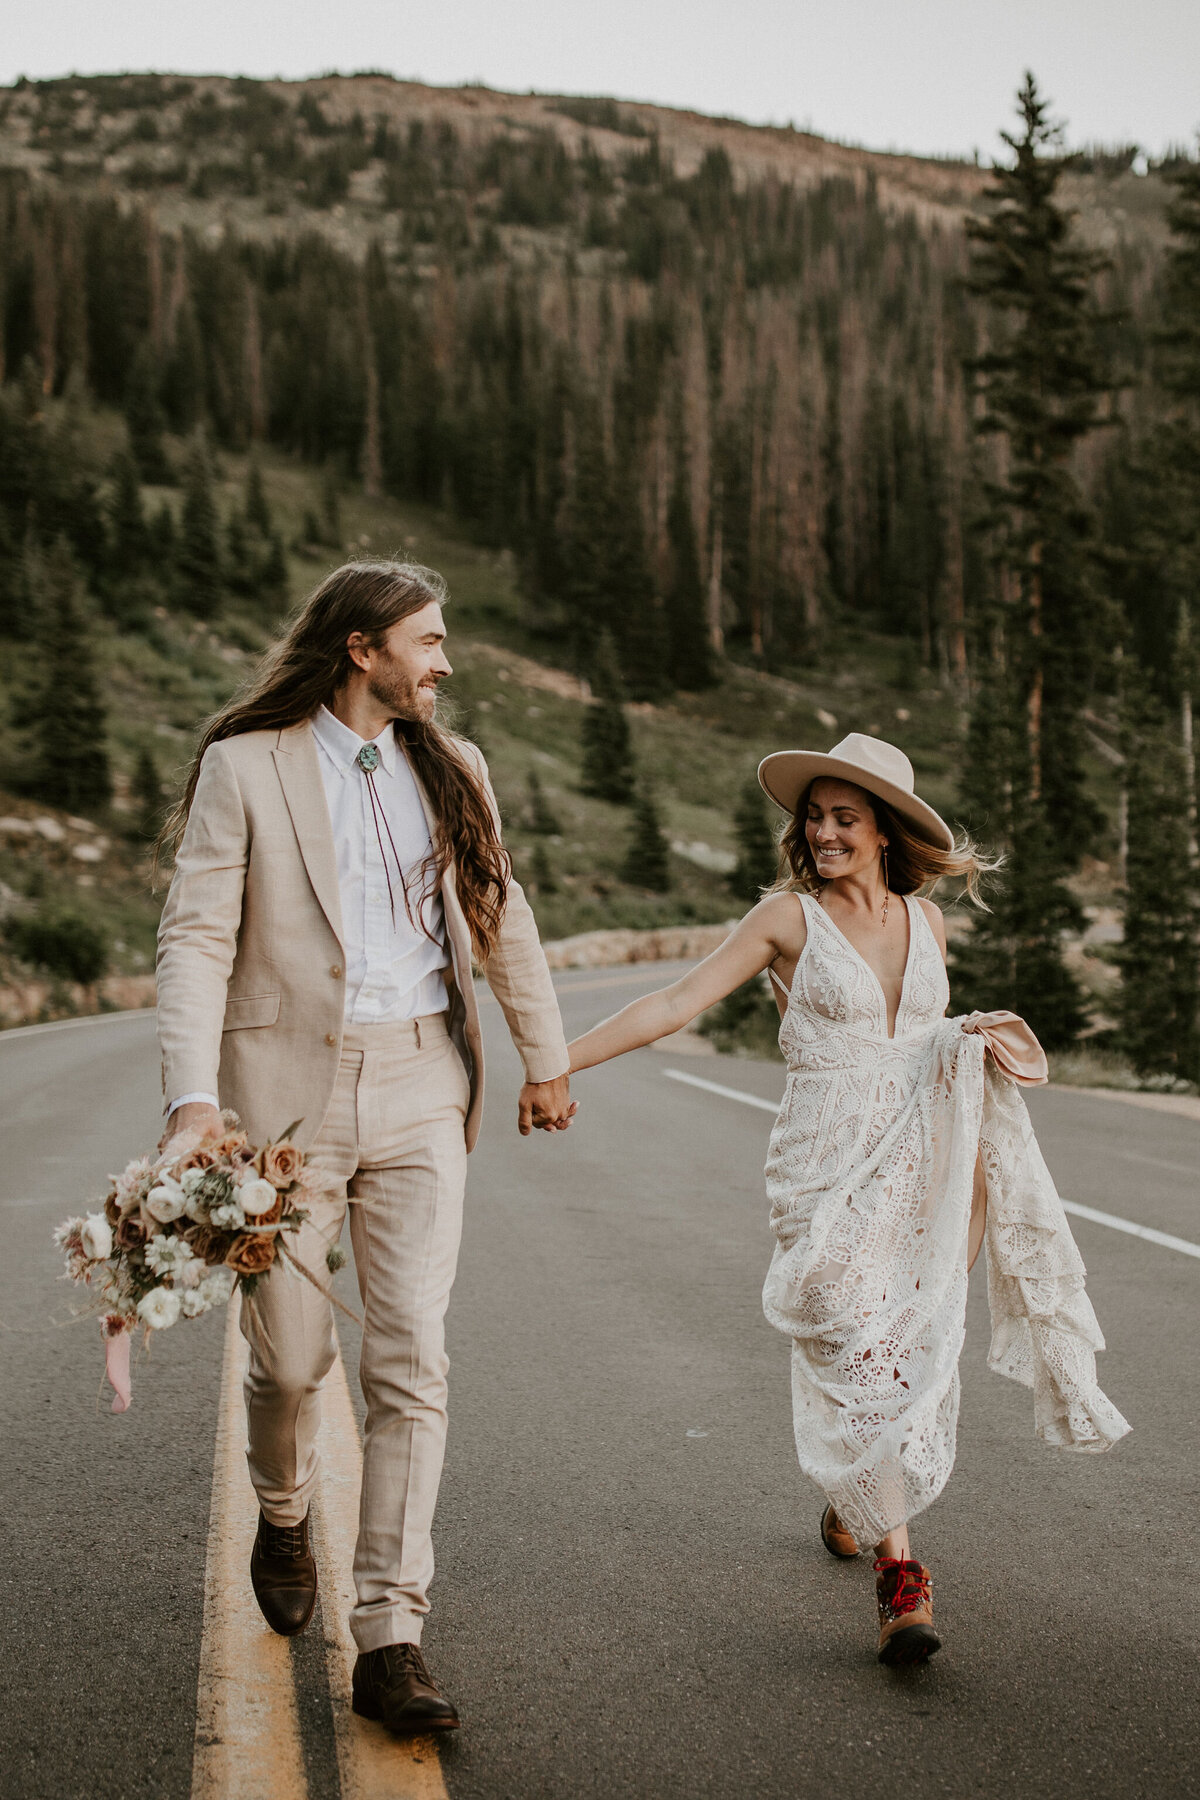 bride and groom wearing an ivory wedding gown and tuxedo hold hands while walking on a road in the mountains